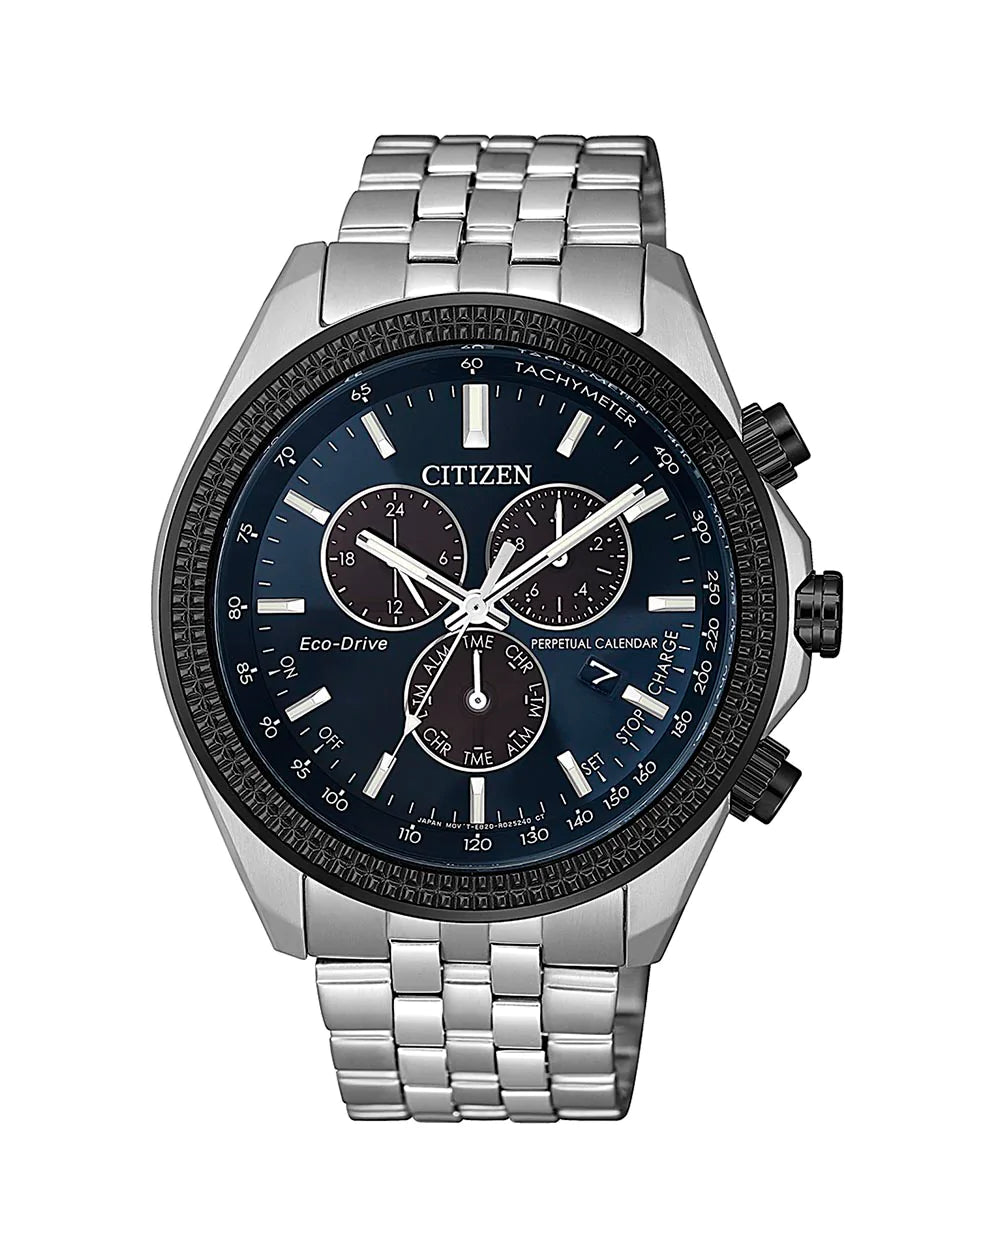 Gents Citizen Eco-Drive Chronograph with Blue Dial